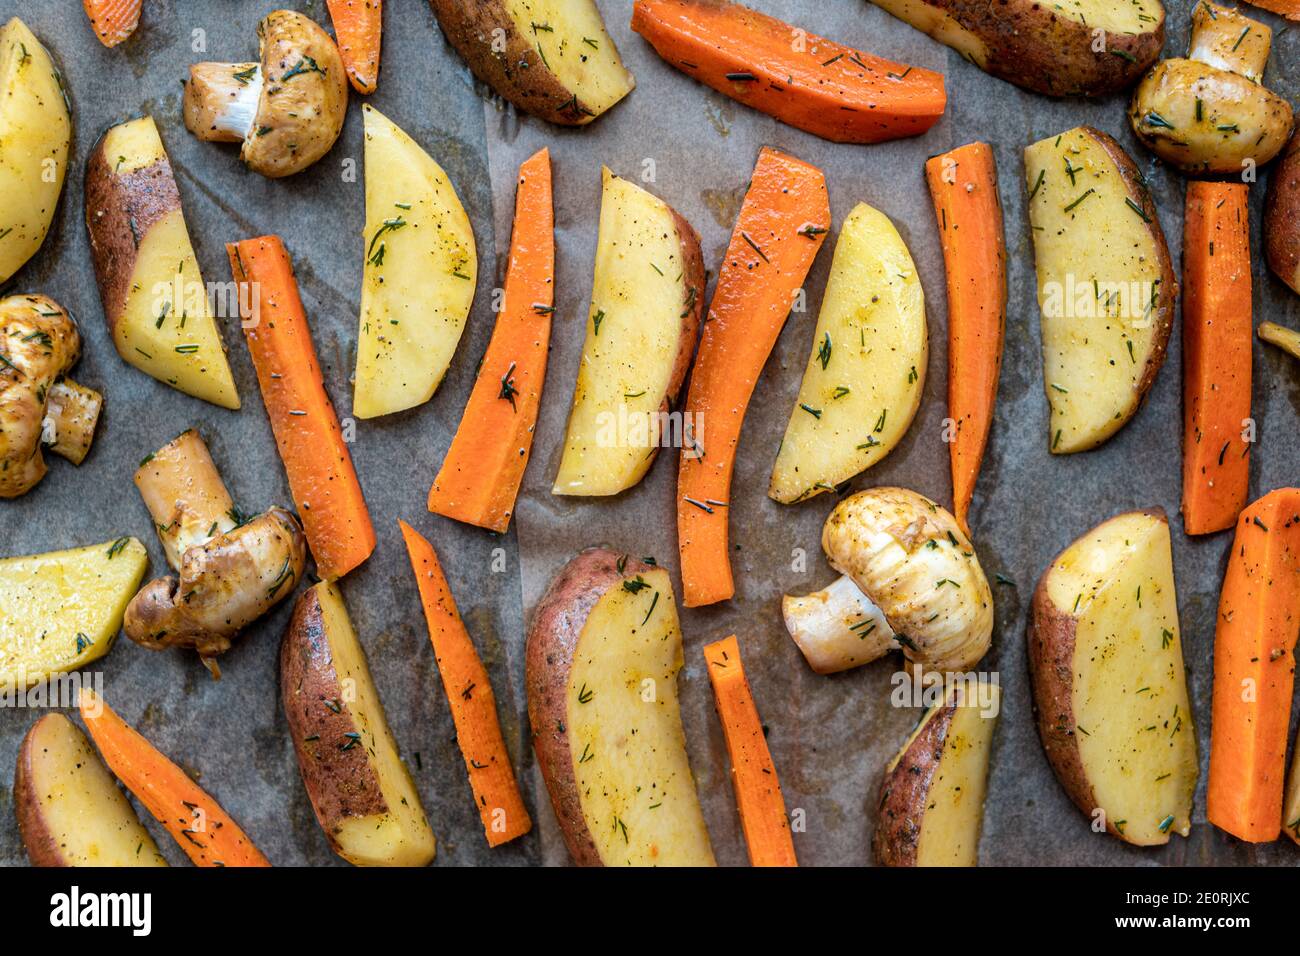 restaurant, vegetarianism, fast, healthy food, recipes concepts - raw cut potatoes carrots, mushrooms with seasoning dill. fresh marinated vegetables Stock Photo